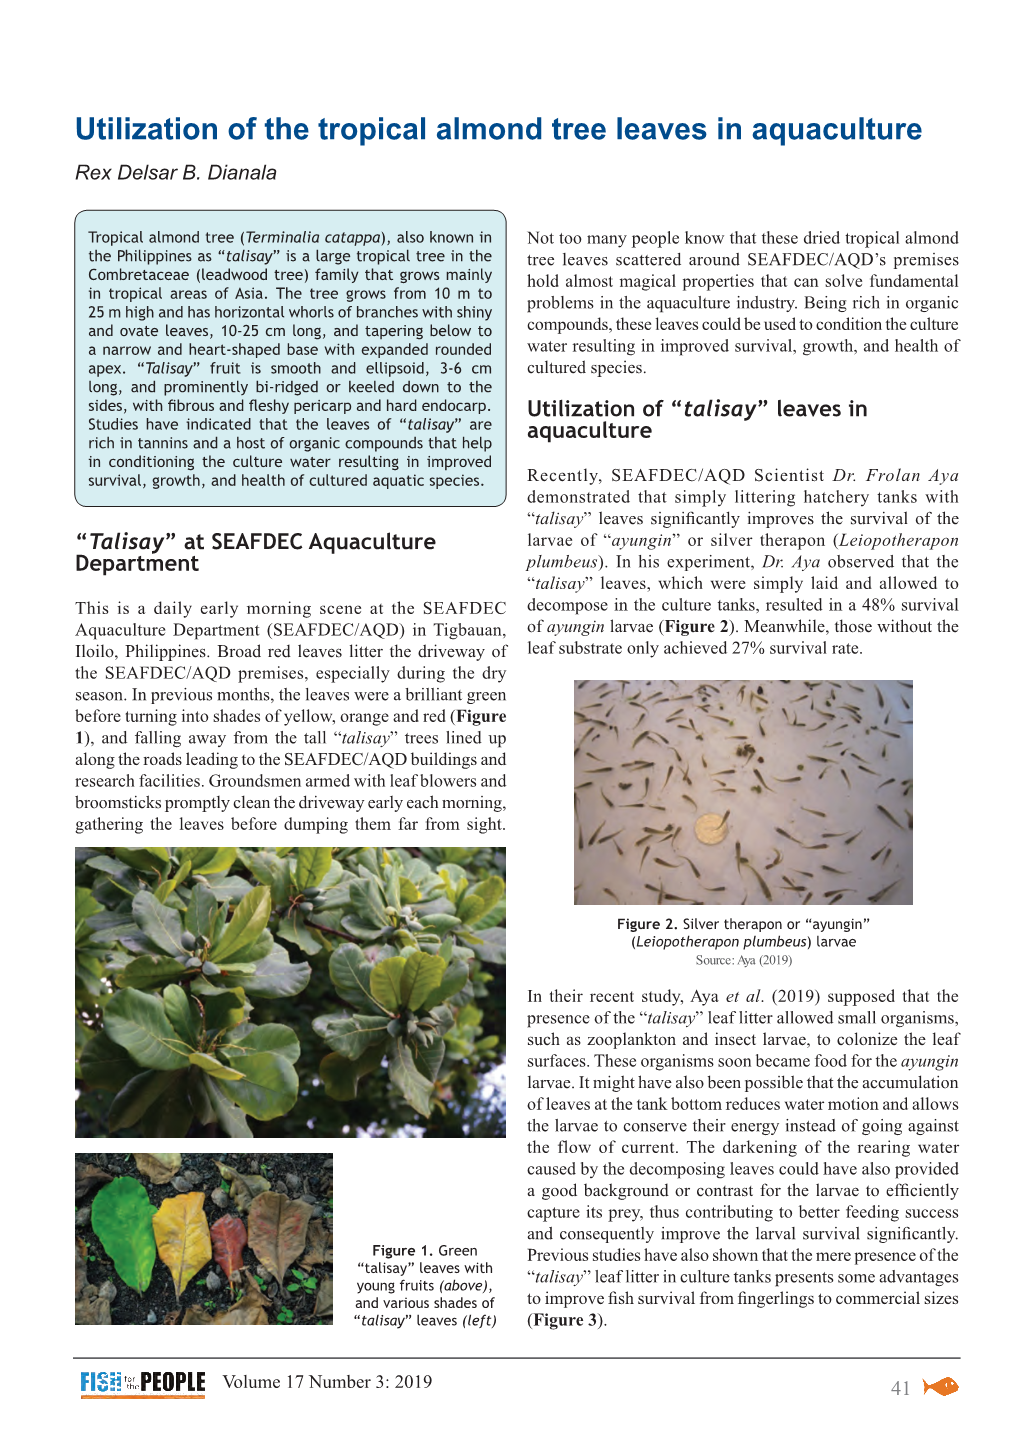 Utilization of the Tropical Almond Tree Leaves in Aquaculture Rex Delsar B